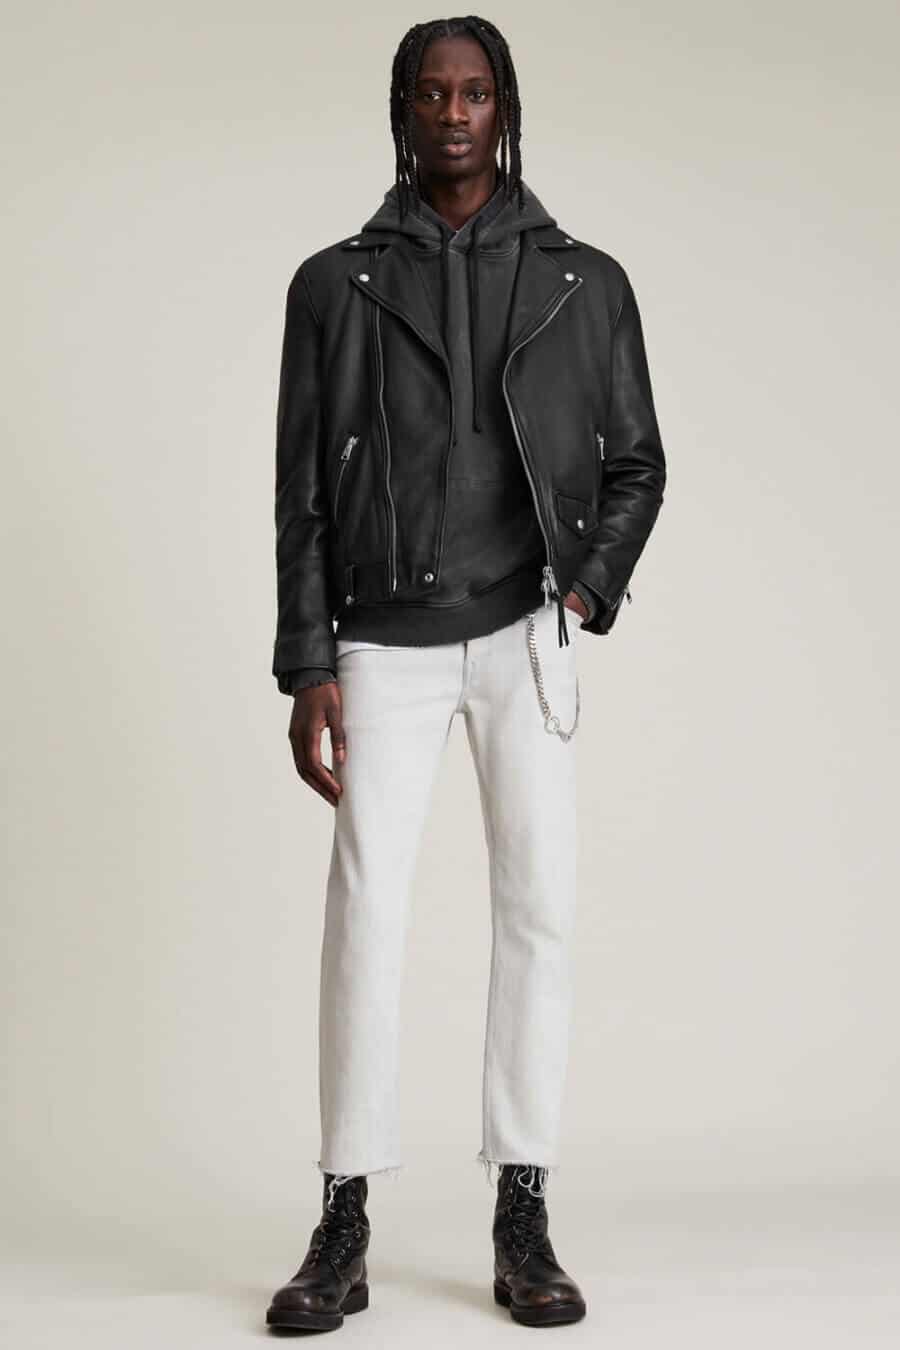 Men's white jeans with black leather jacket outfit